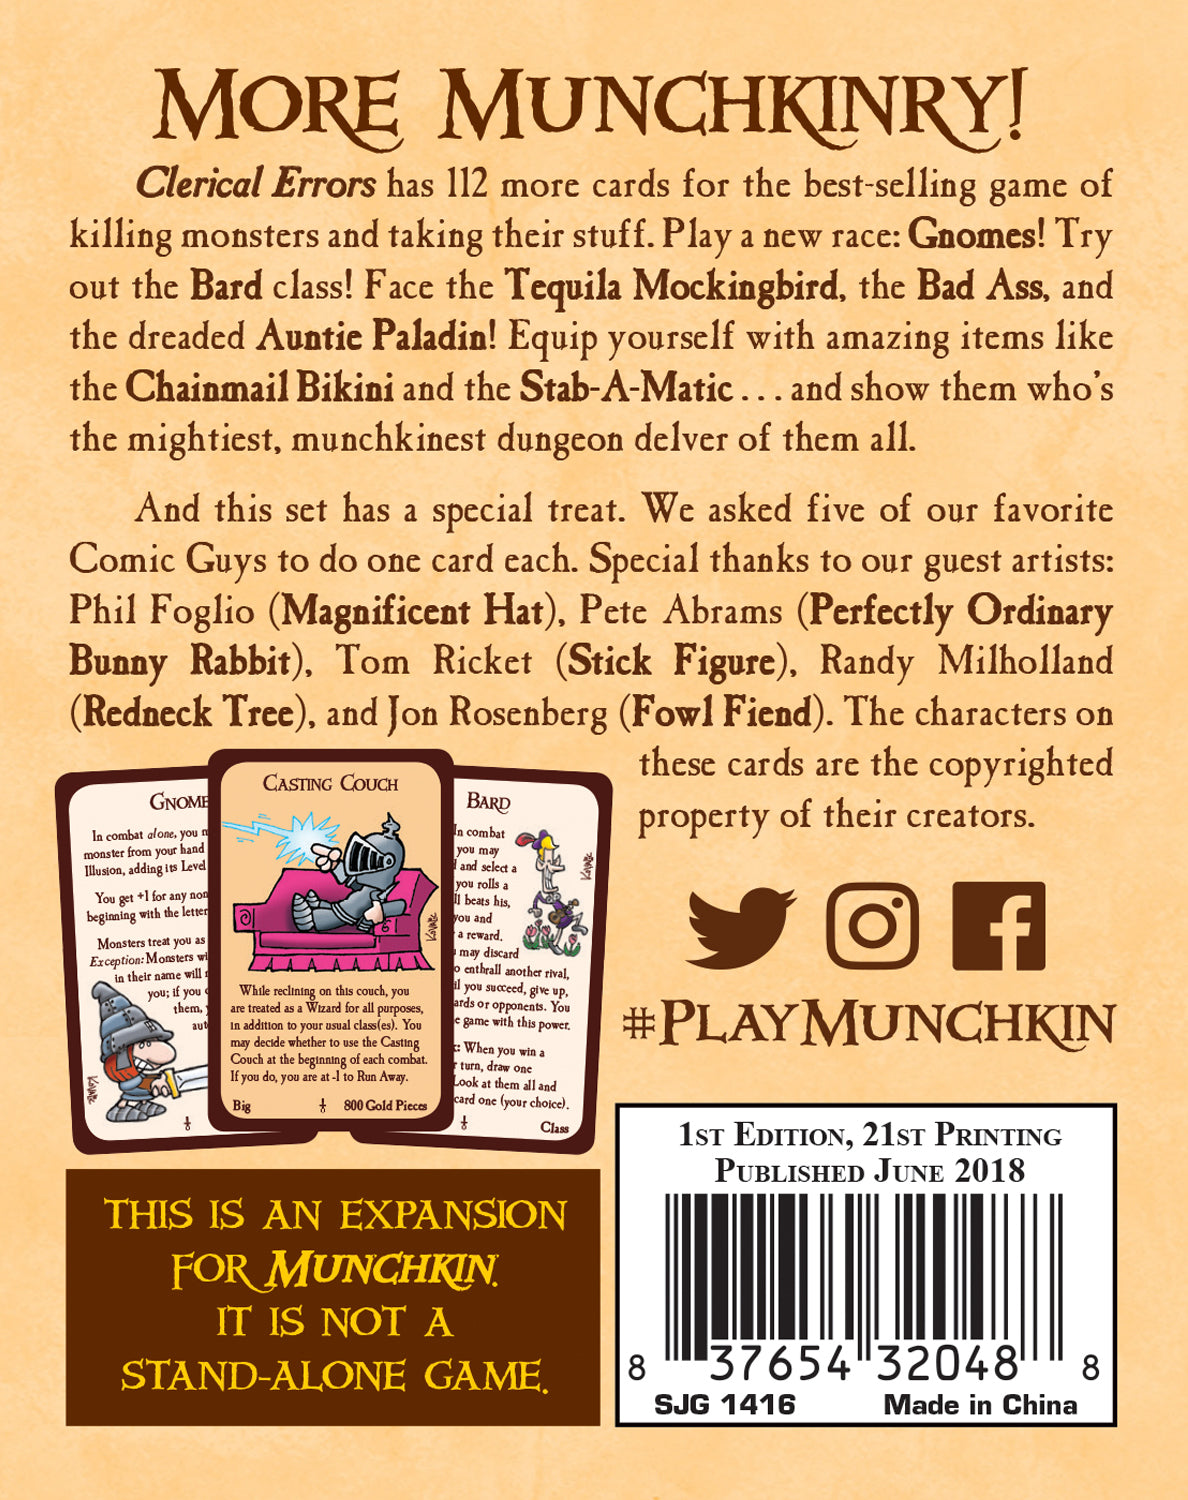 Munchkin 3: Clerical Errors (Expansion)